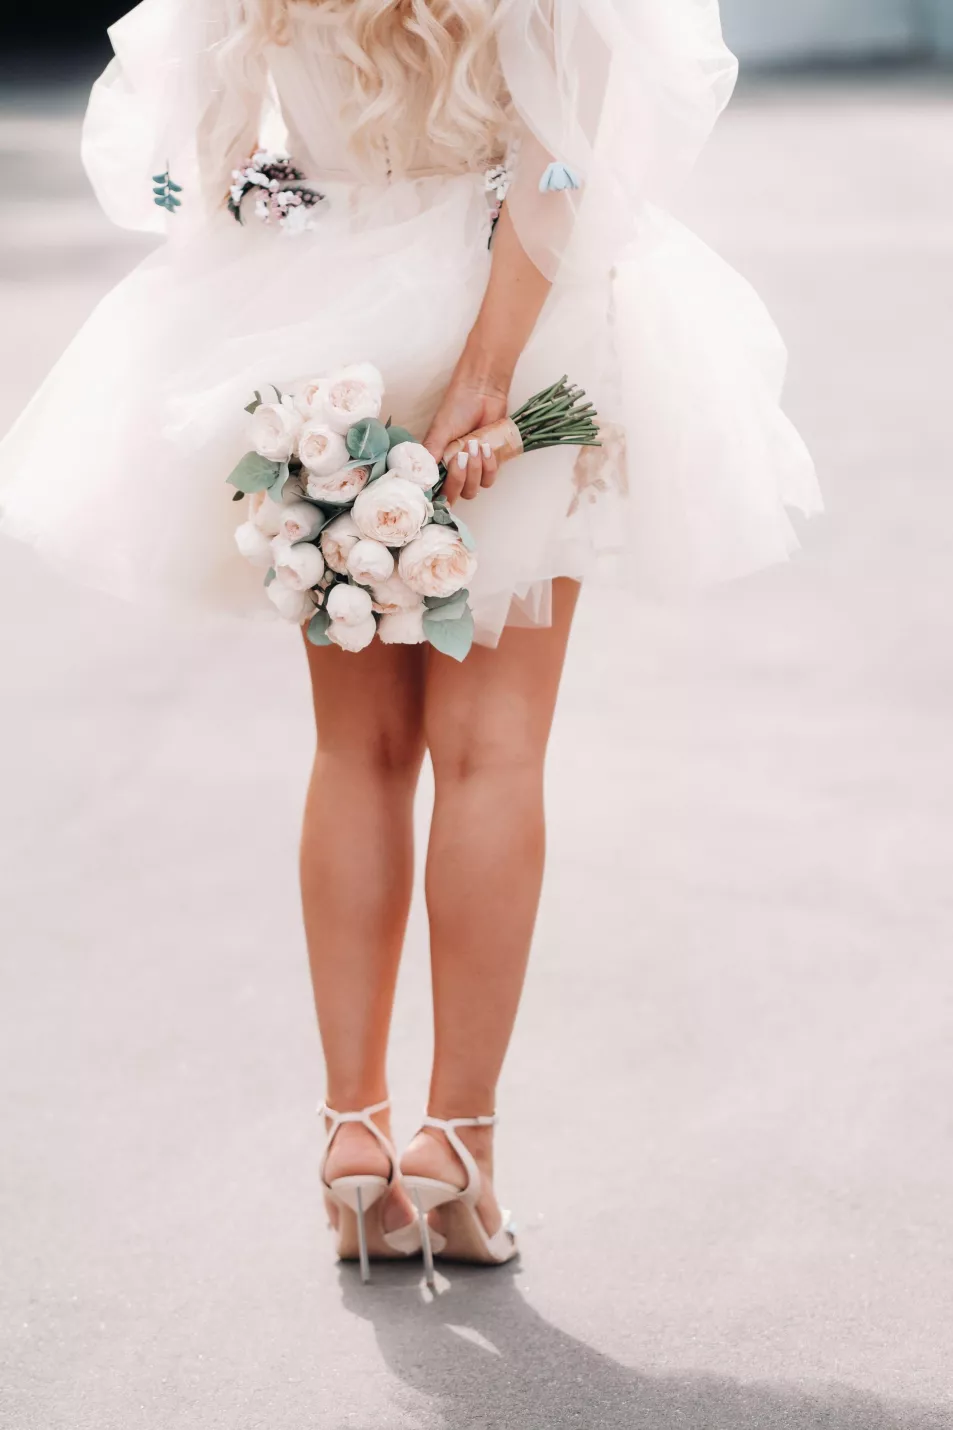 A bride with a short wedding dress holds a bouquet behind her back